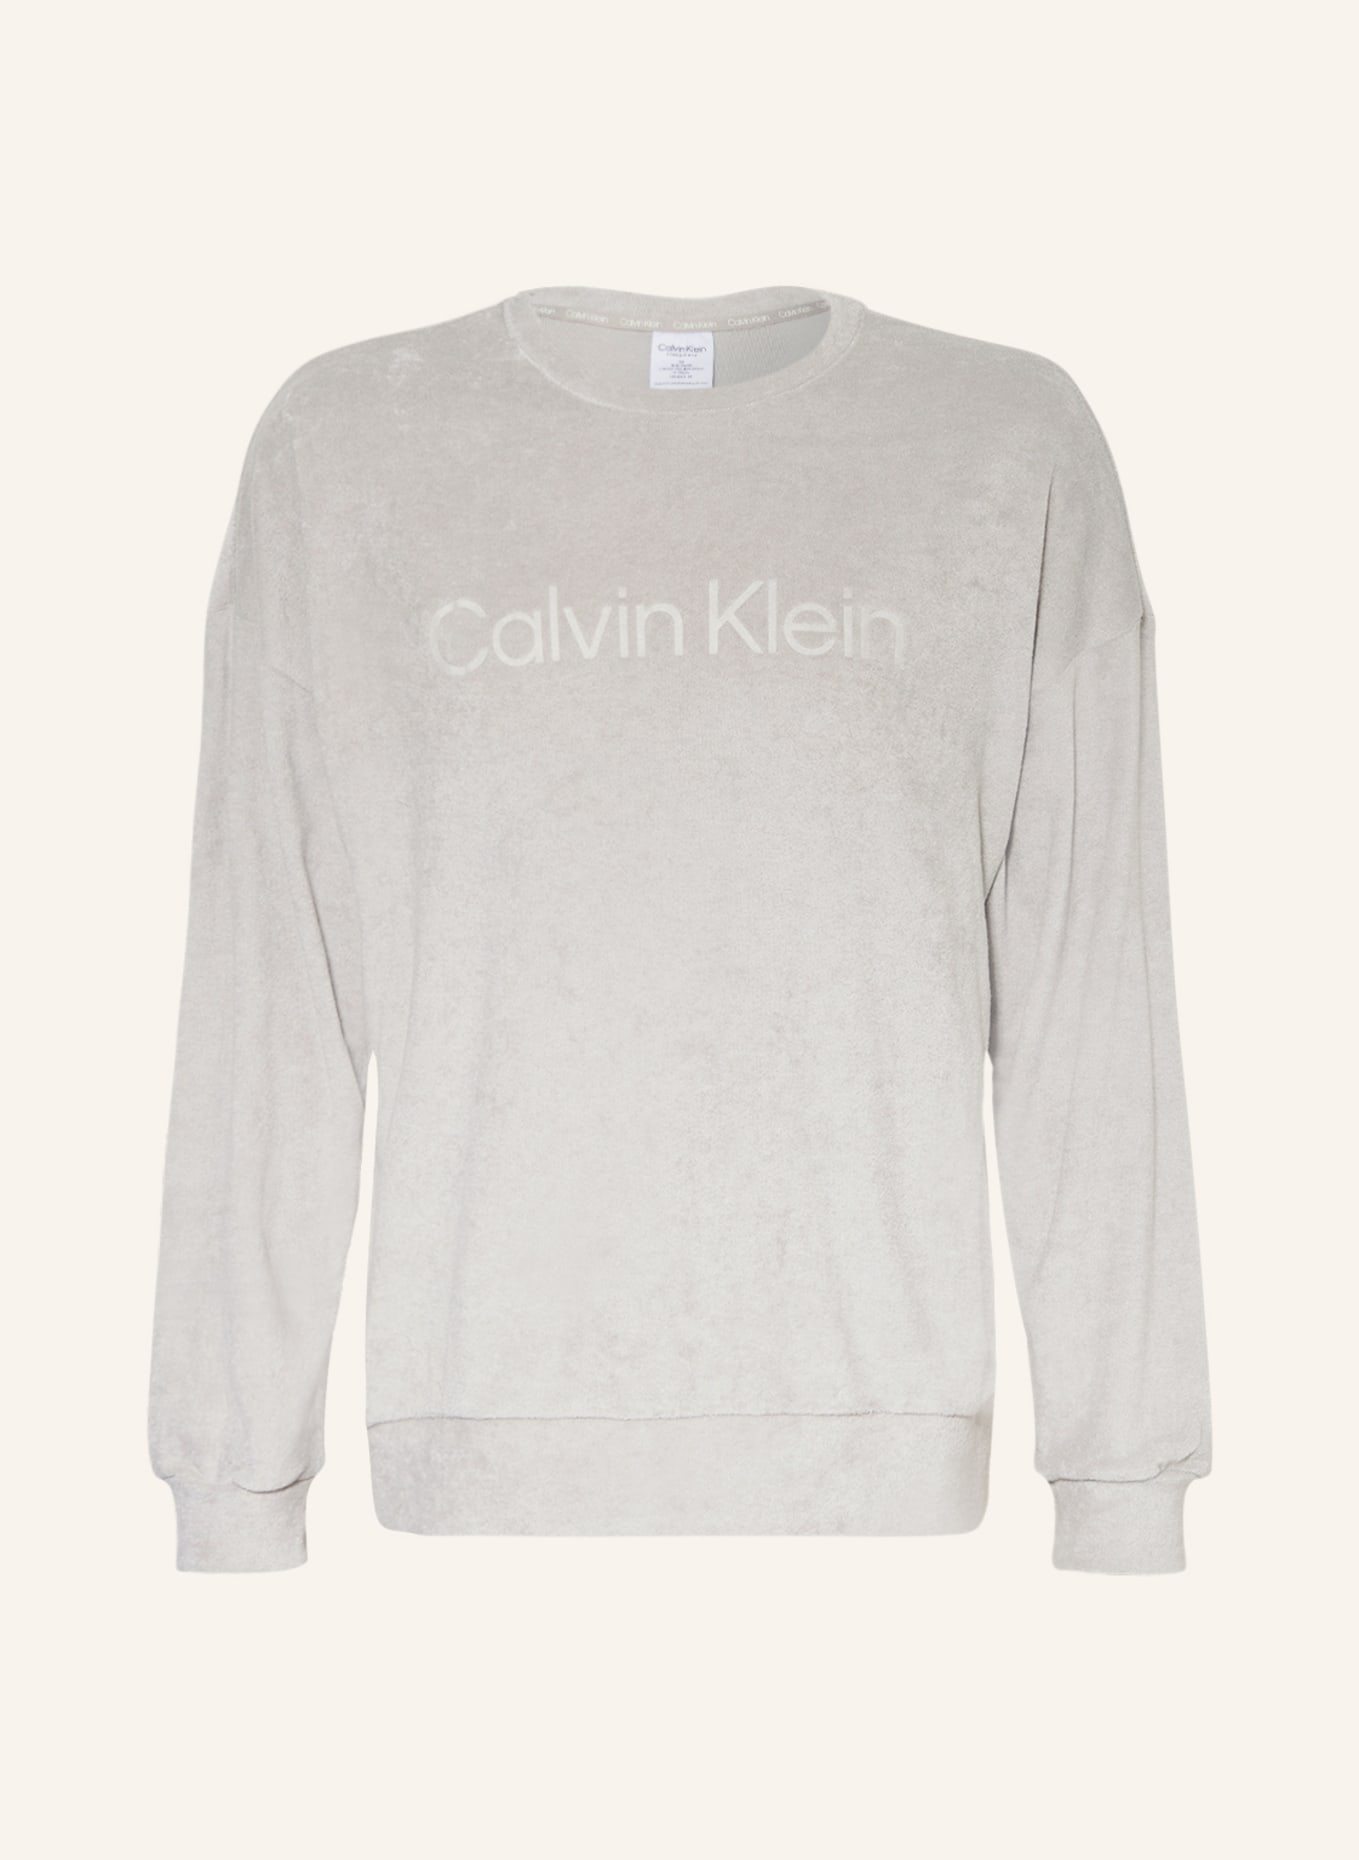 Calvin Klein Lounge shirt made of terry cloth, Color: LIGHT GRAY (Image 1)